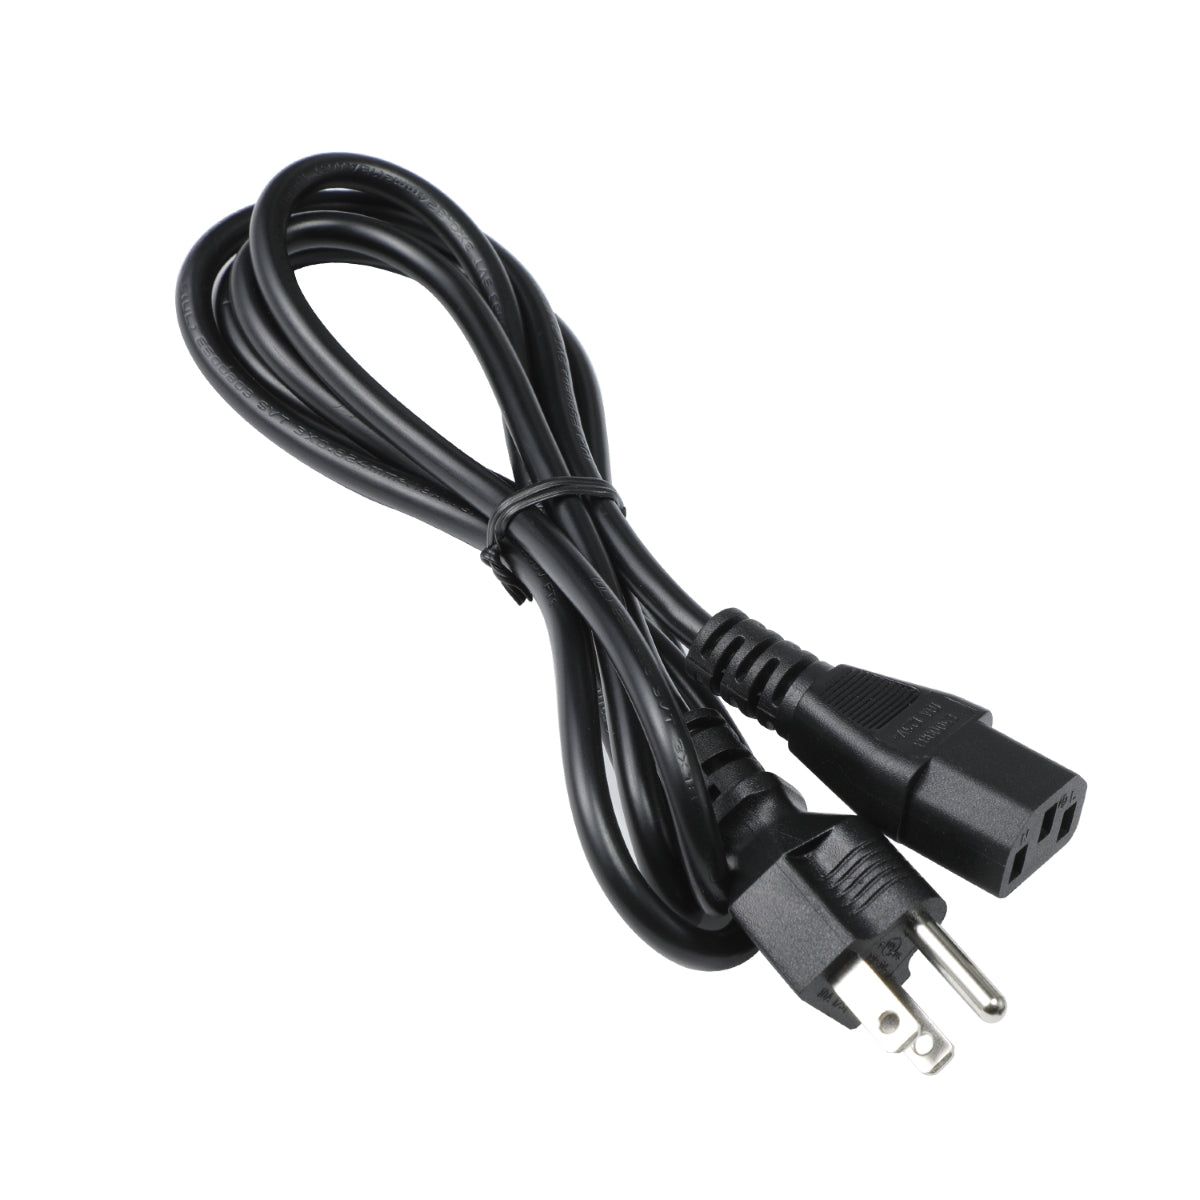 Power Supply for HP 27w 27-inch Monitor